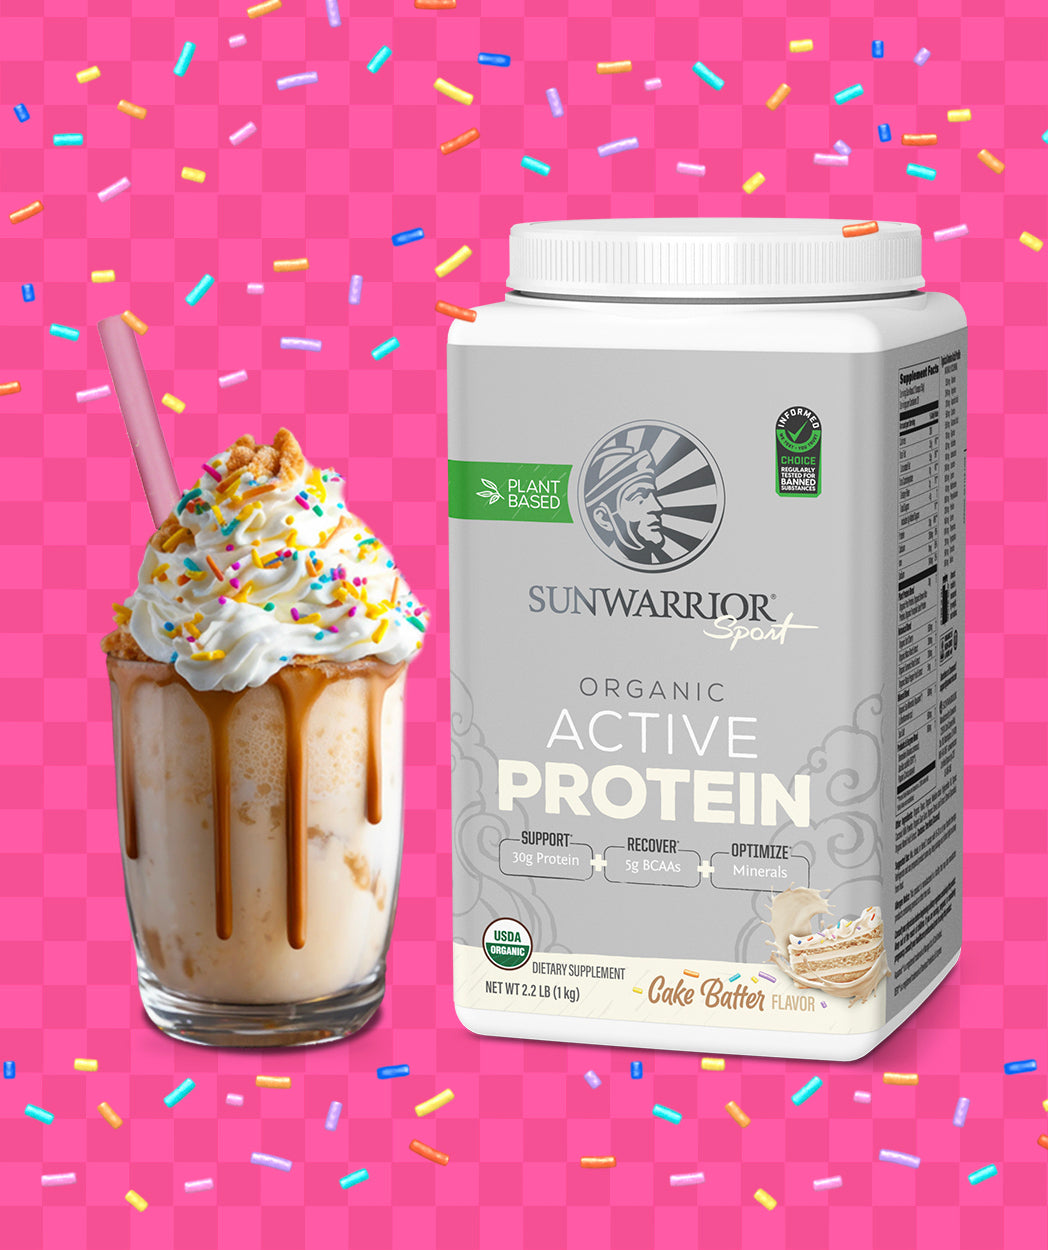 Milkshake with sprinkles next to a container of Sunwarrior Active Protein powder with a pink background.